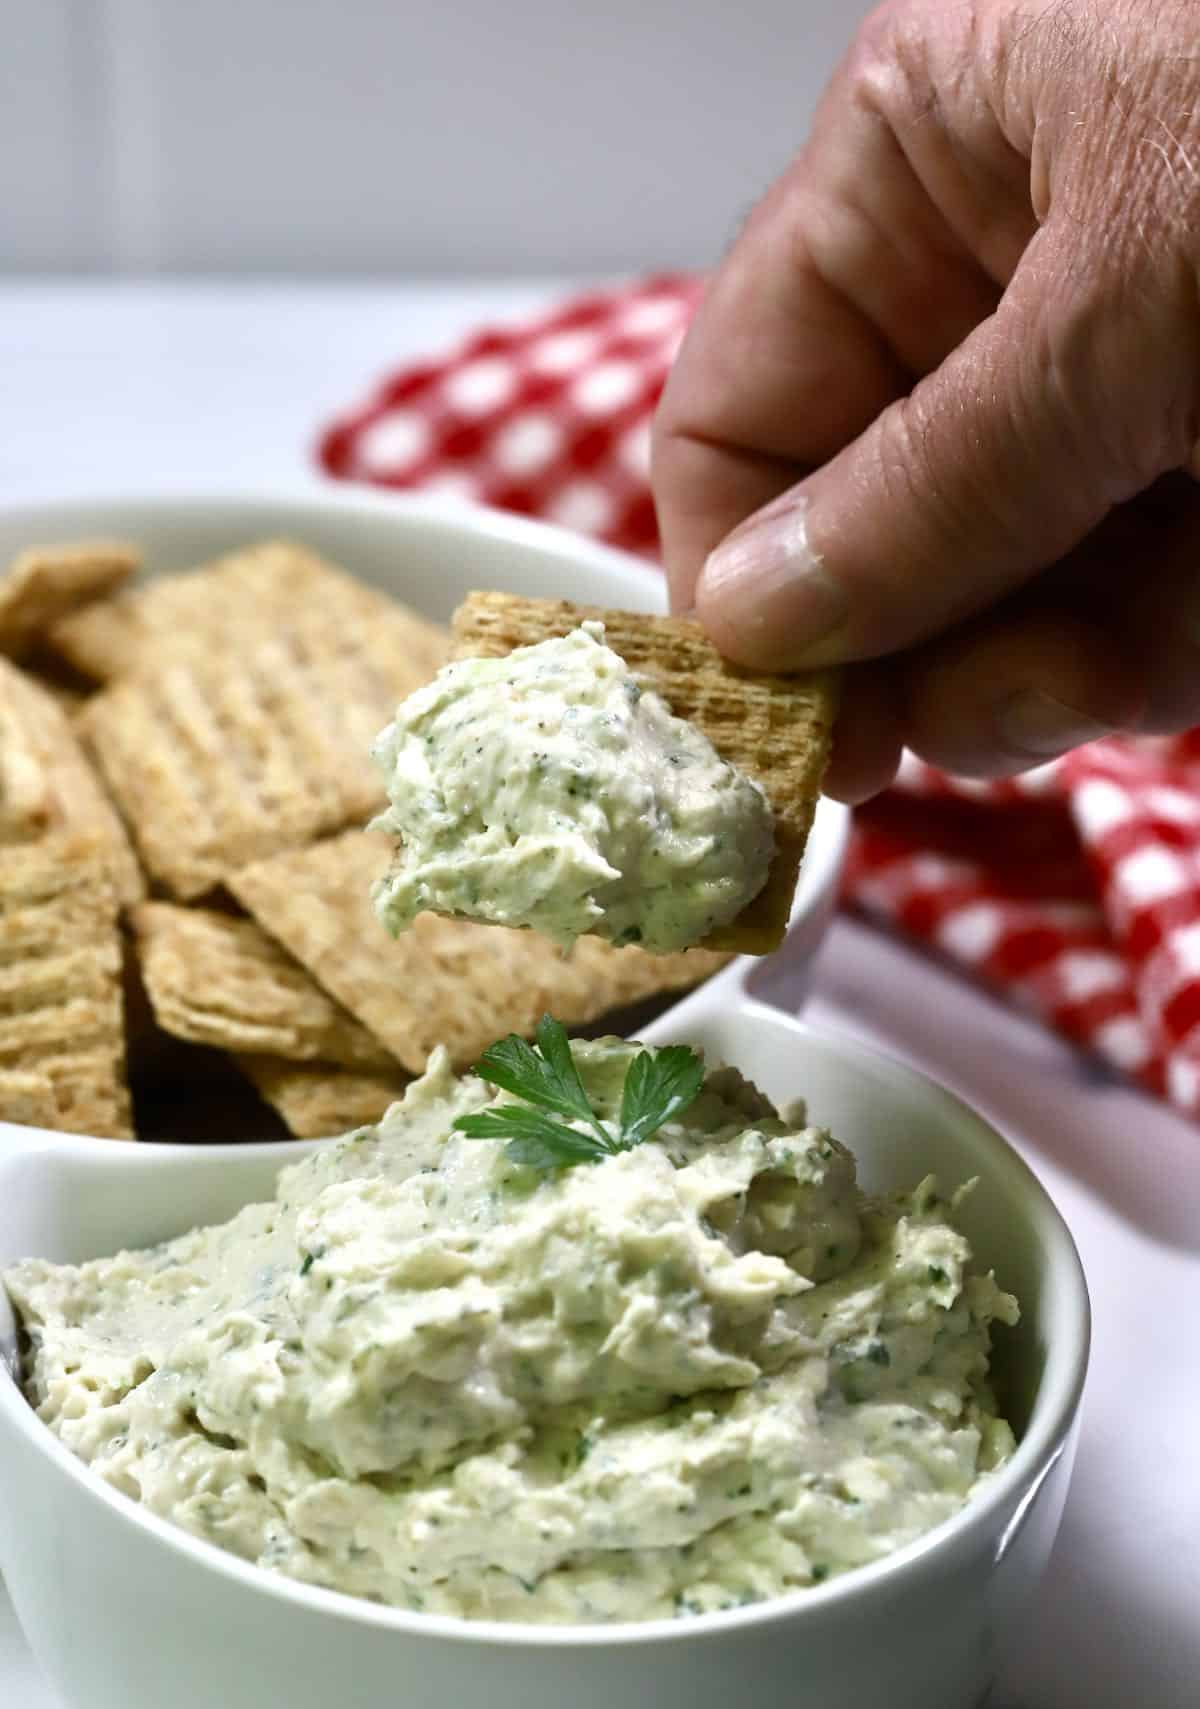 A scoop of chicken ranch dip on a Triscuit.